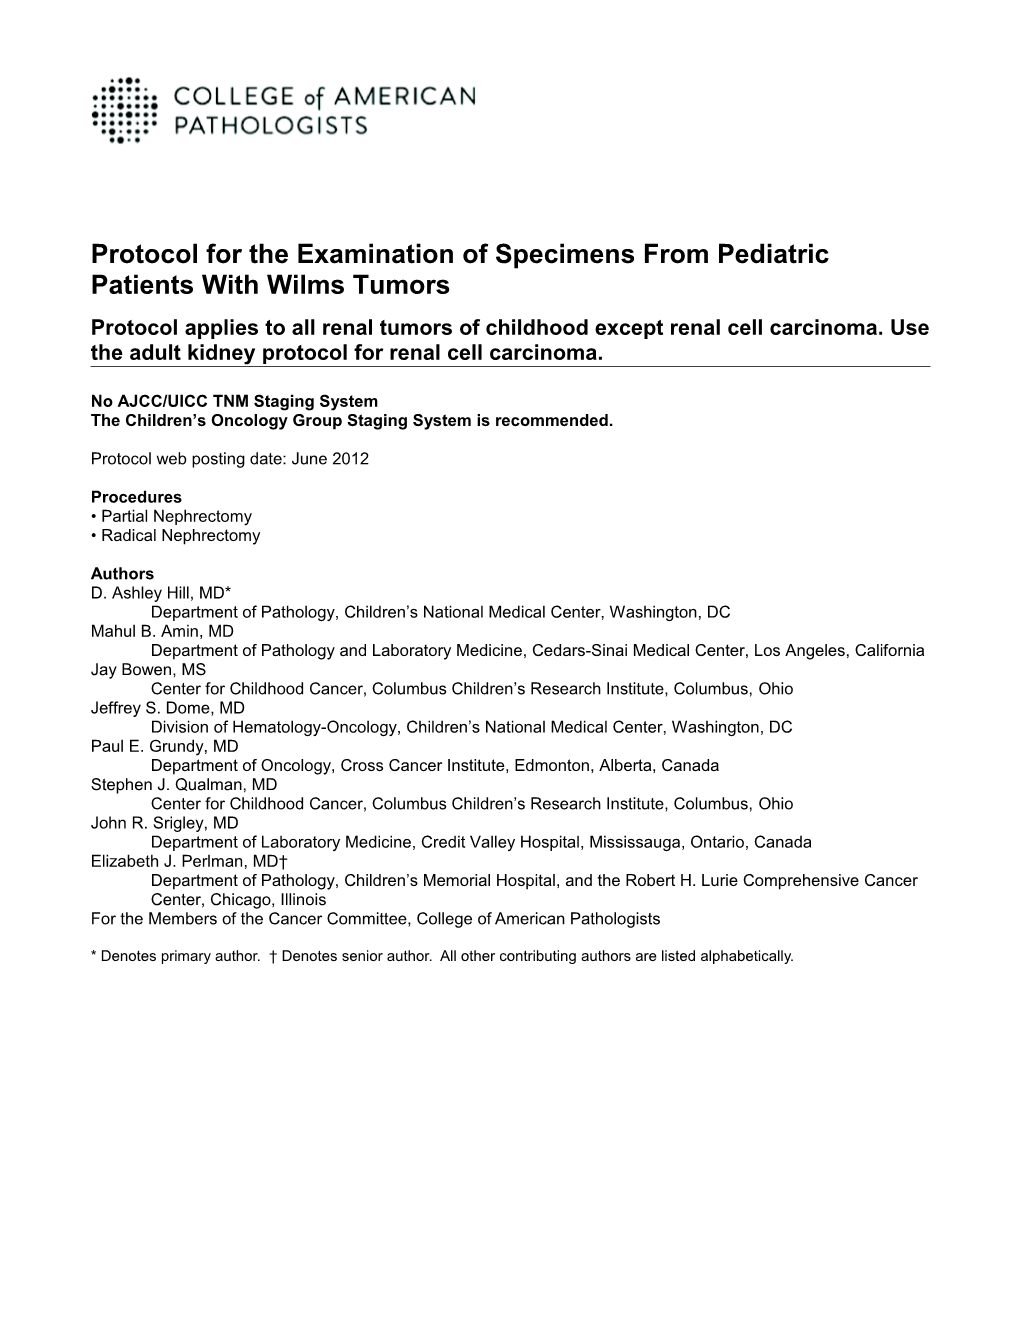 Protocol for the Examination of Specimens from Pediatric Patients with Wilms Tumors